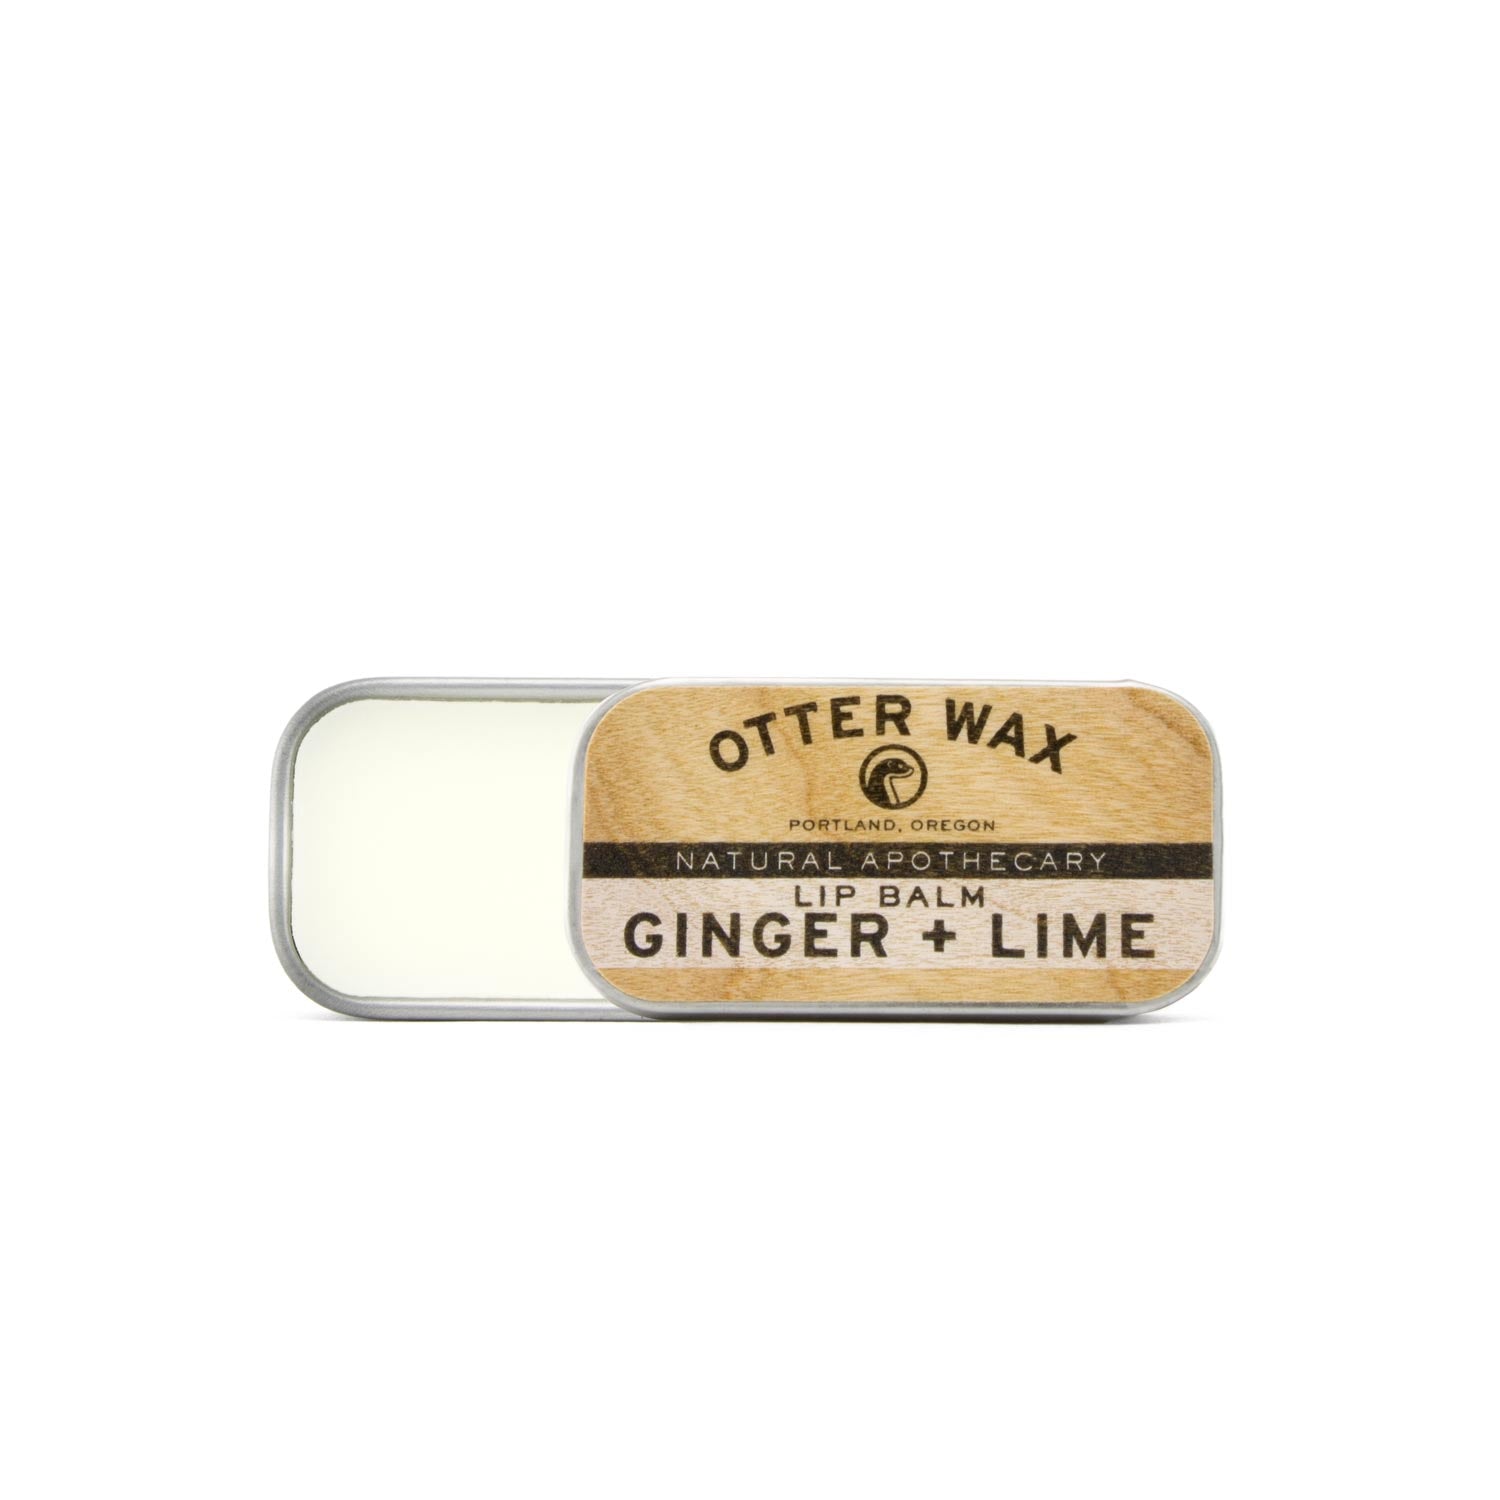 Otter Wax All Natural Ginger Lime Moisturizing Lip Balm Treatment With Beeswax Shea Butter And Essential Oils To Nourish Hydrate And Heal Dry Cracked Lips